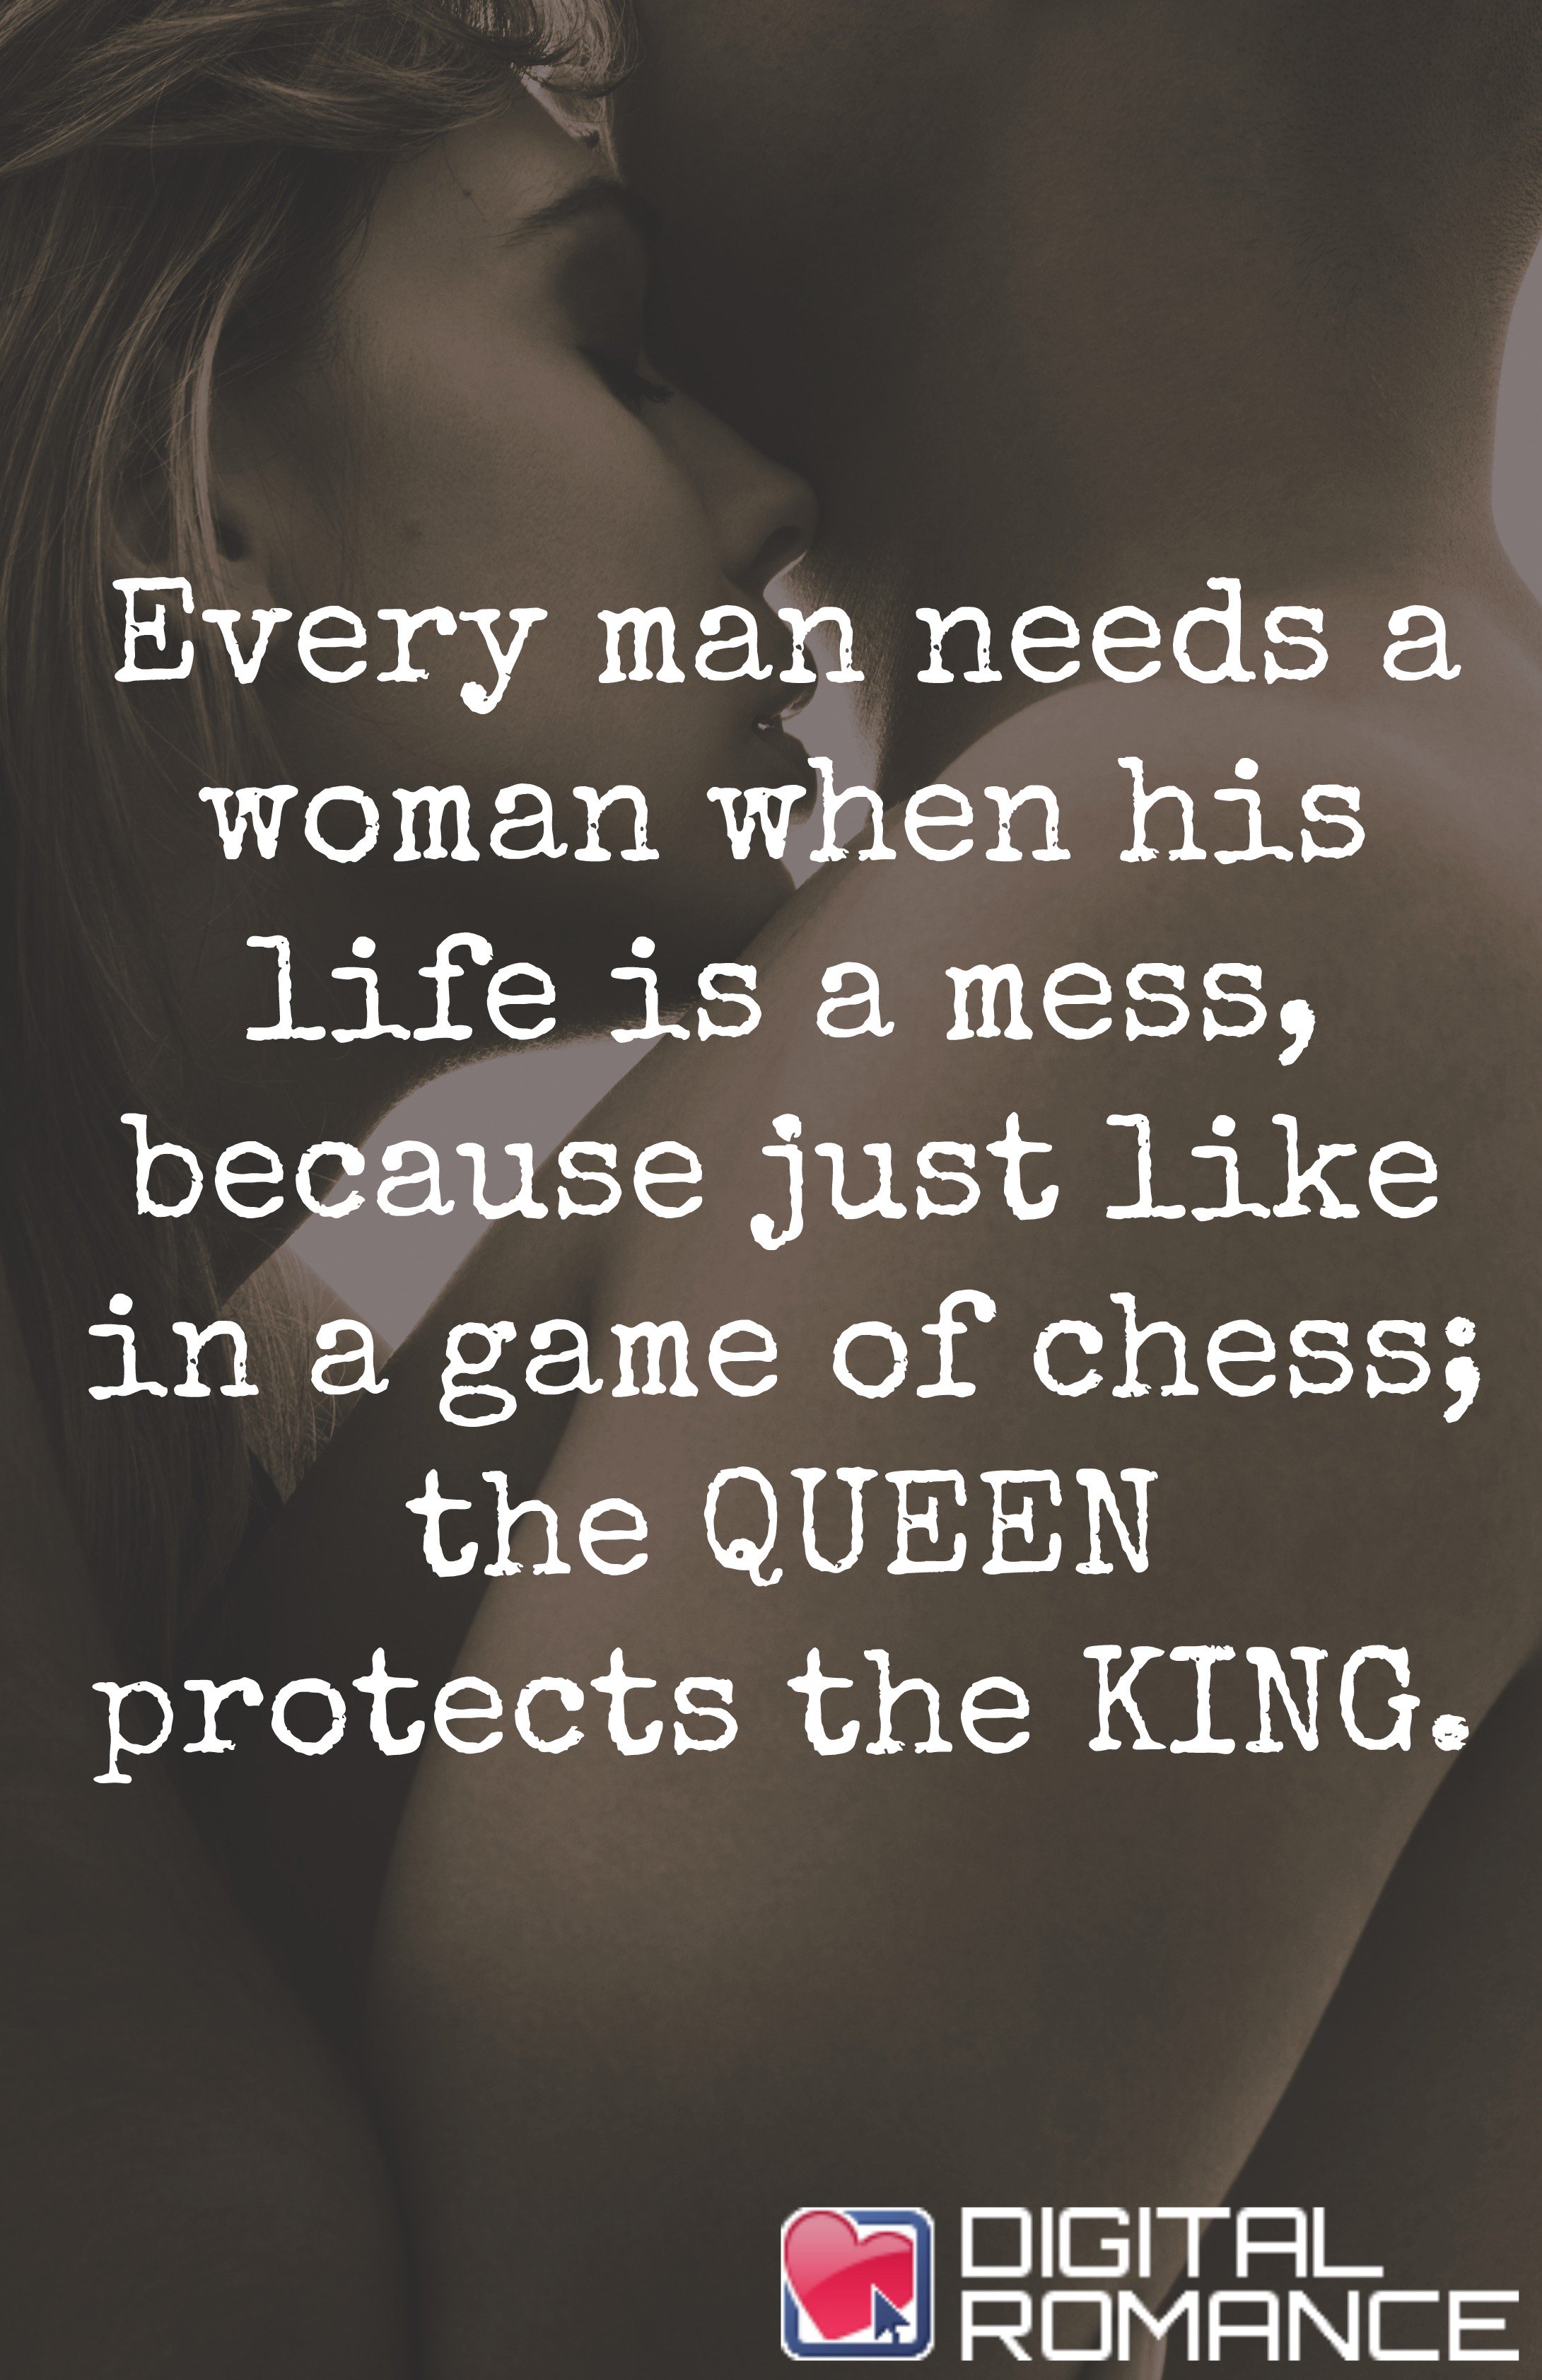 This Queen & Her King Just like in the game of chess This